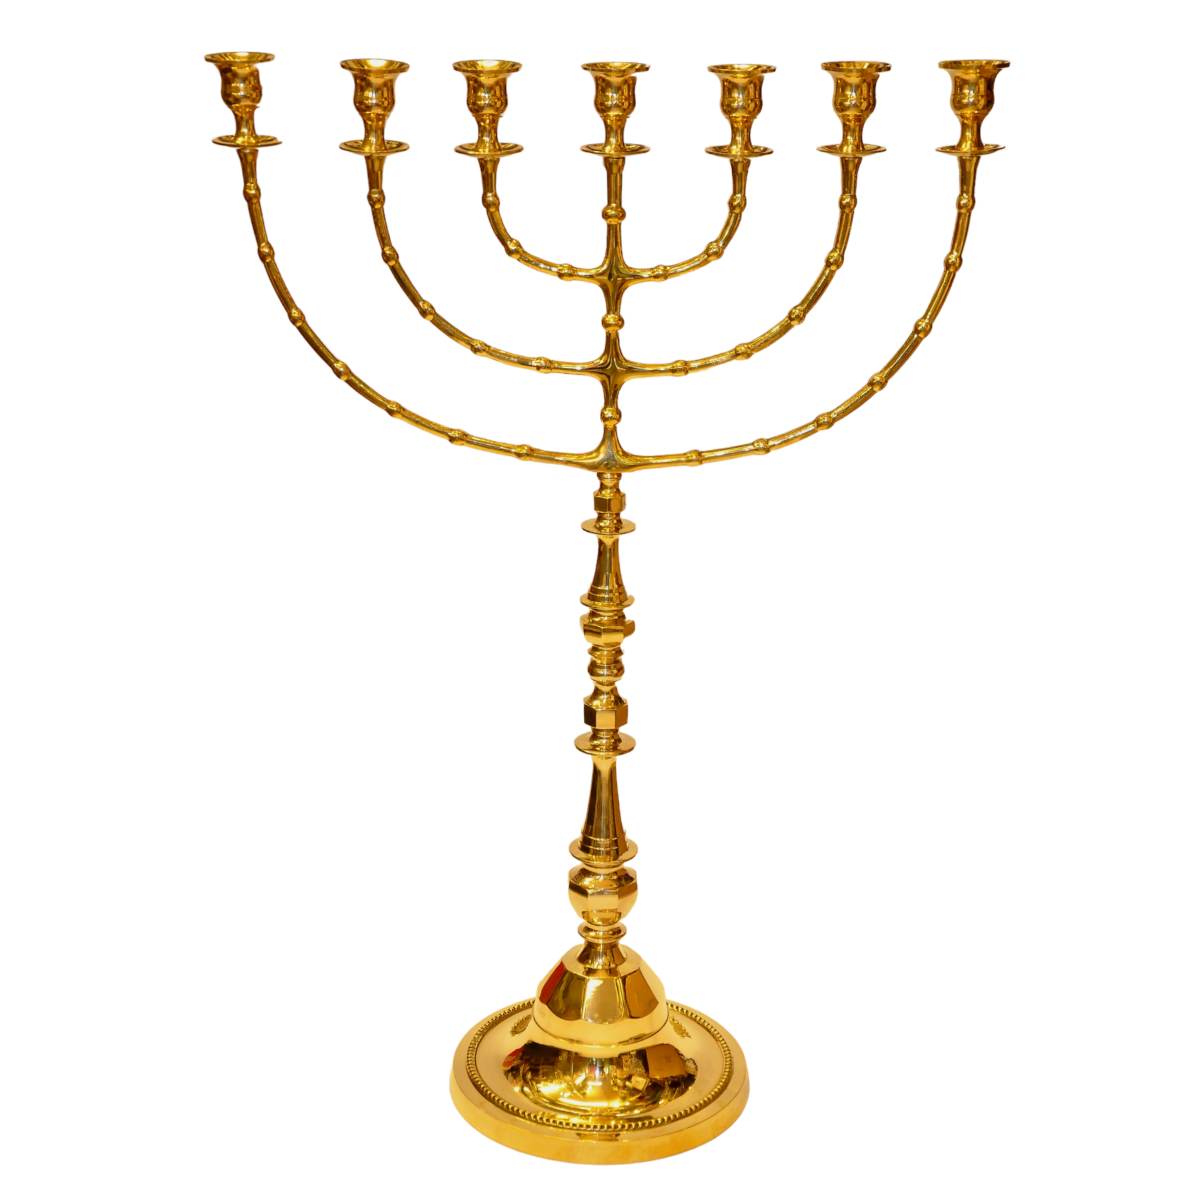 Temple Menorah Gold Plated From Holy Land Jerusalem 35.4″ / 90 cm